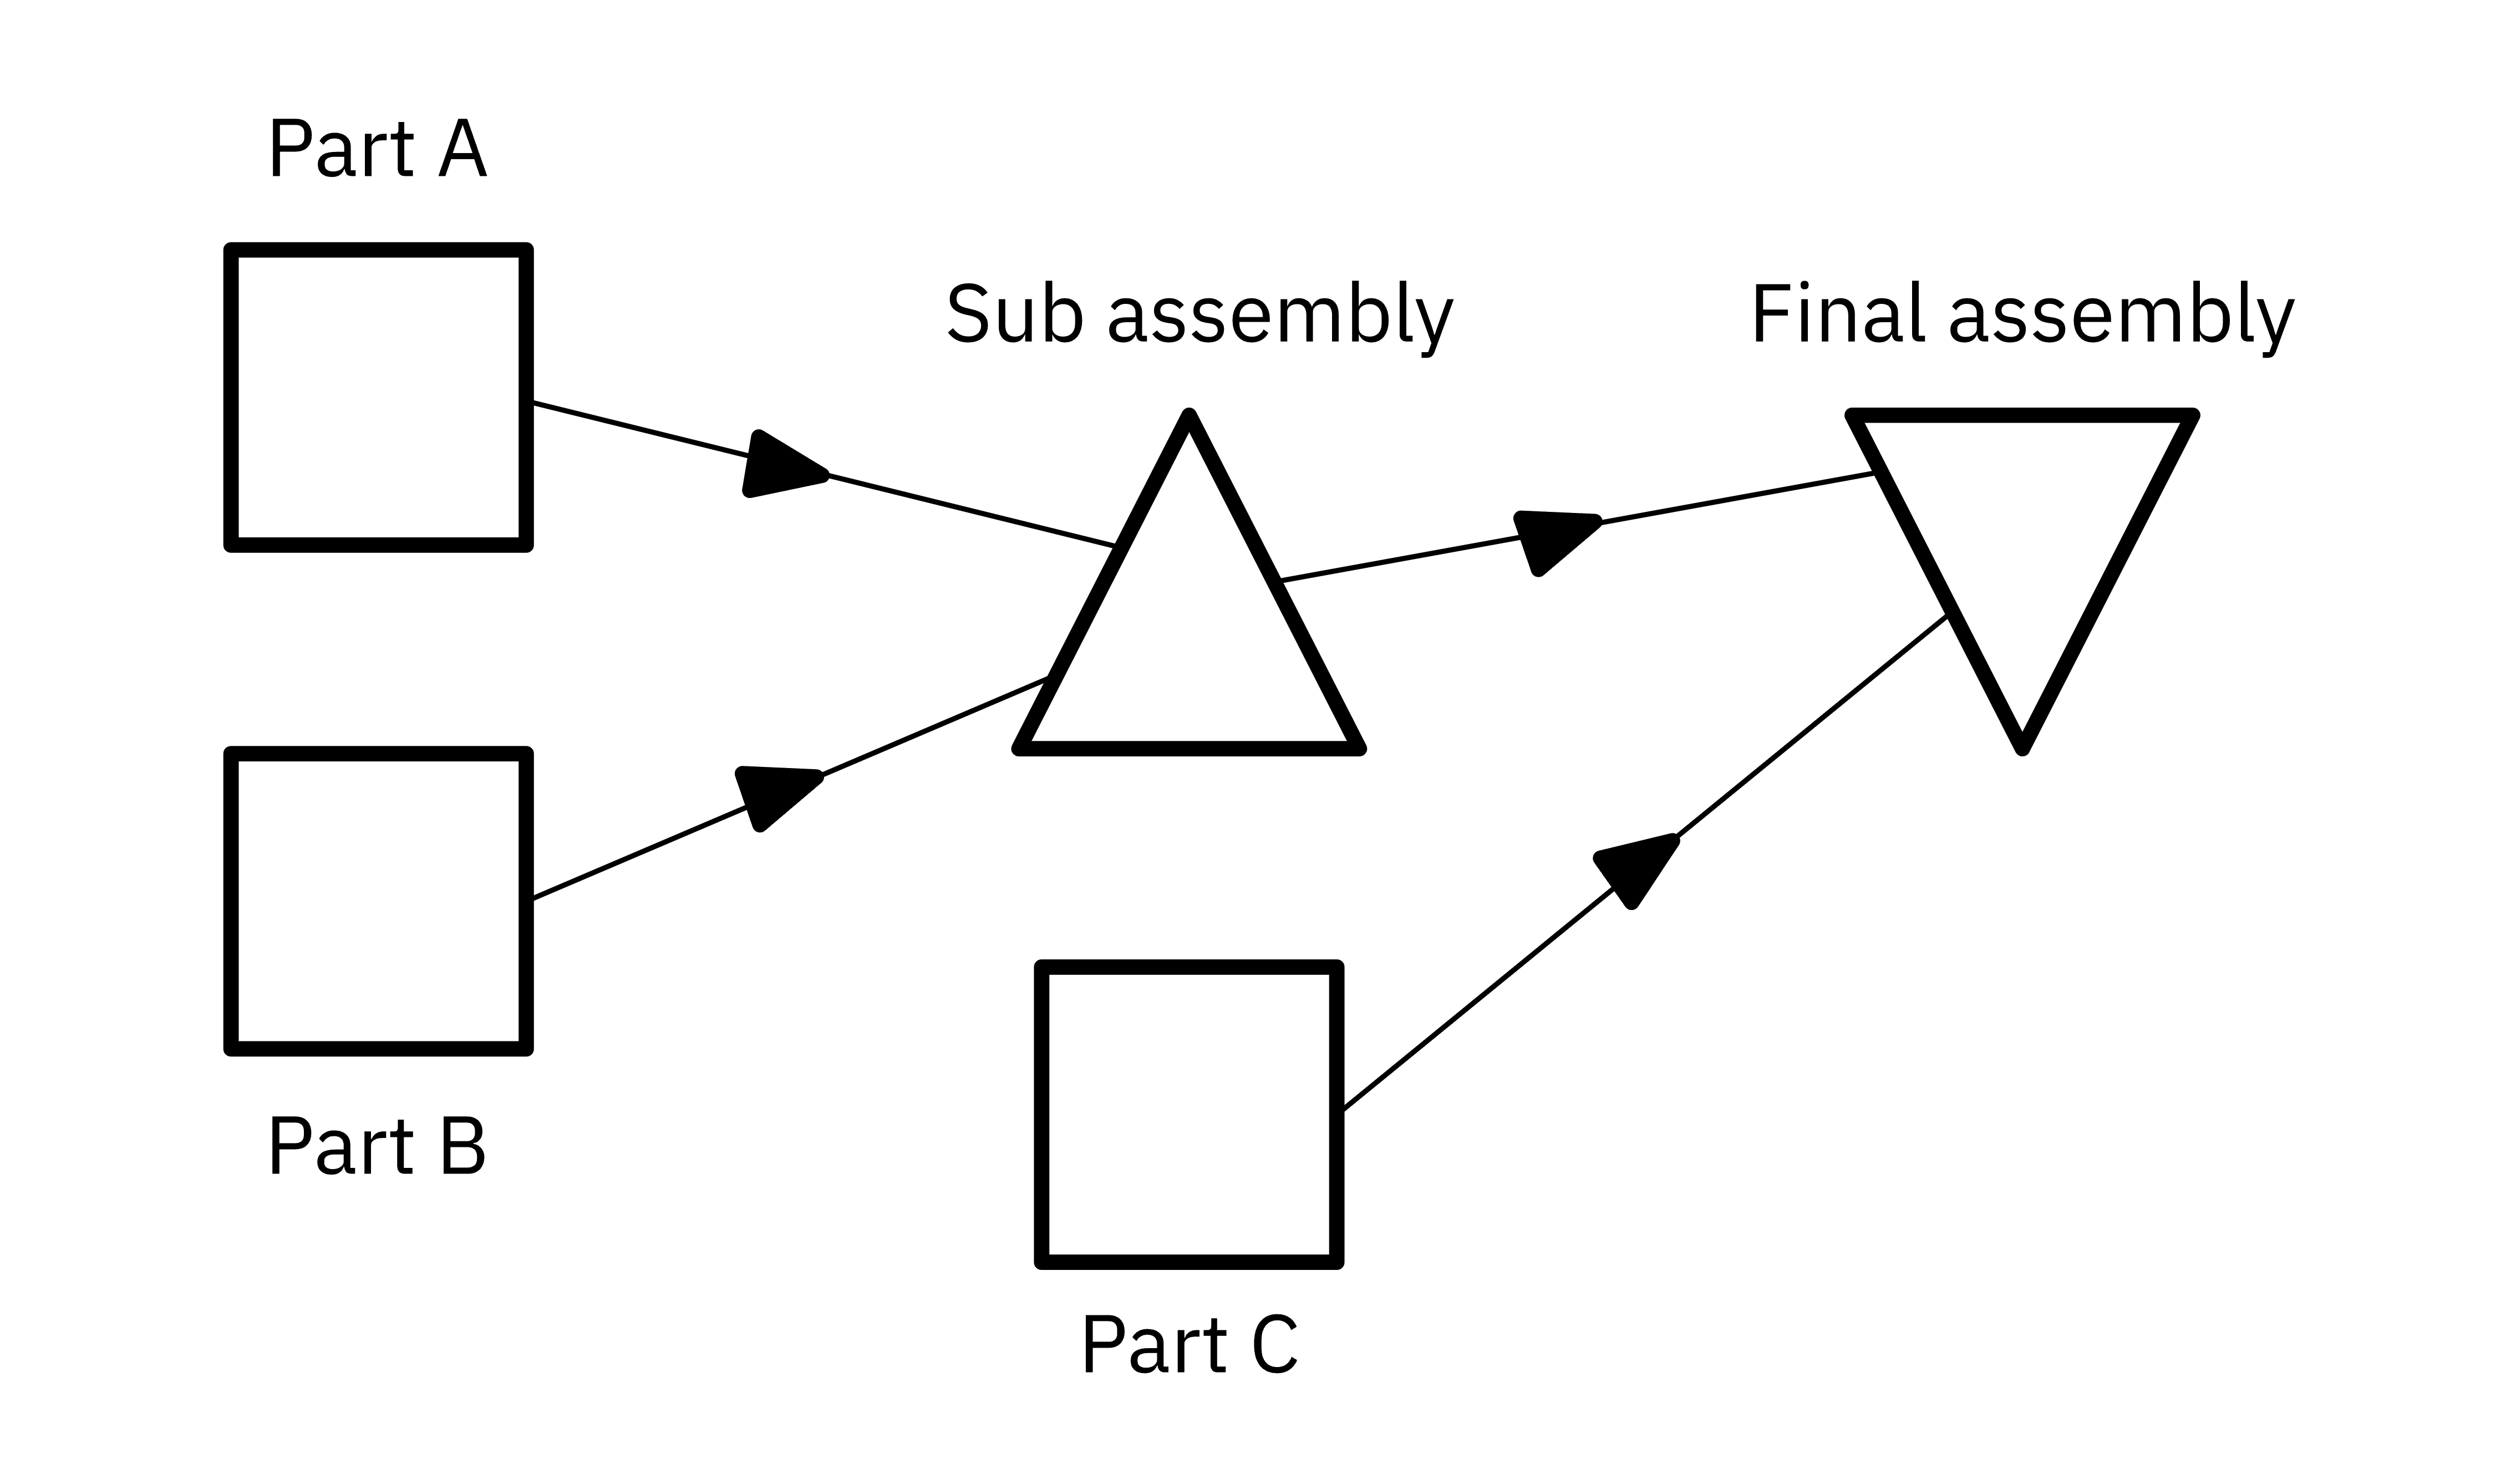 Figure 1: simple assembly network